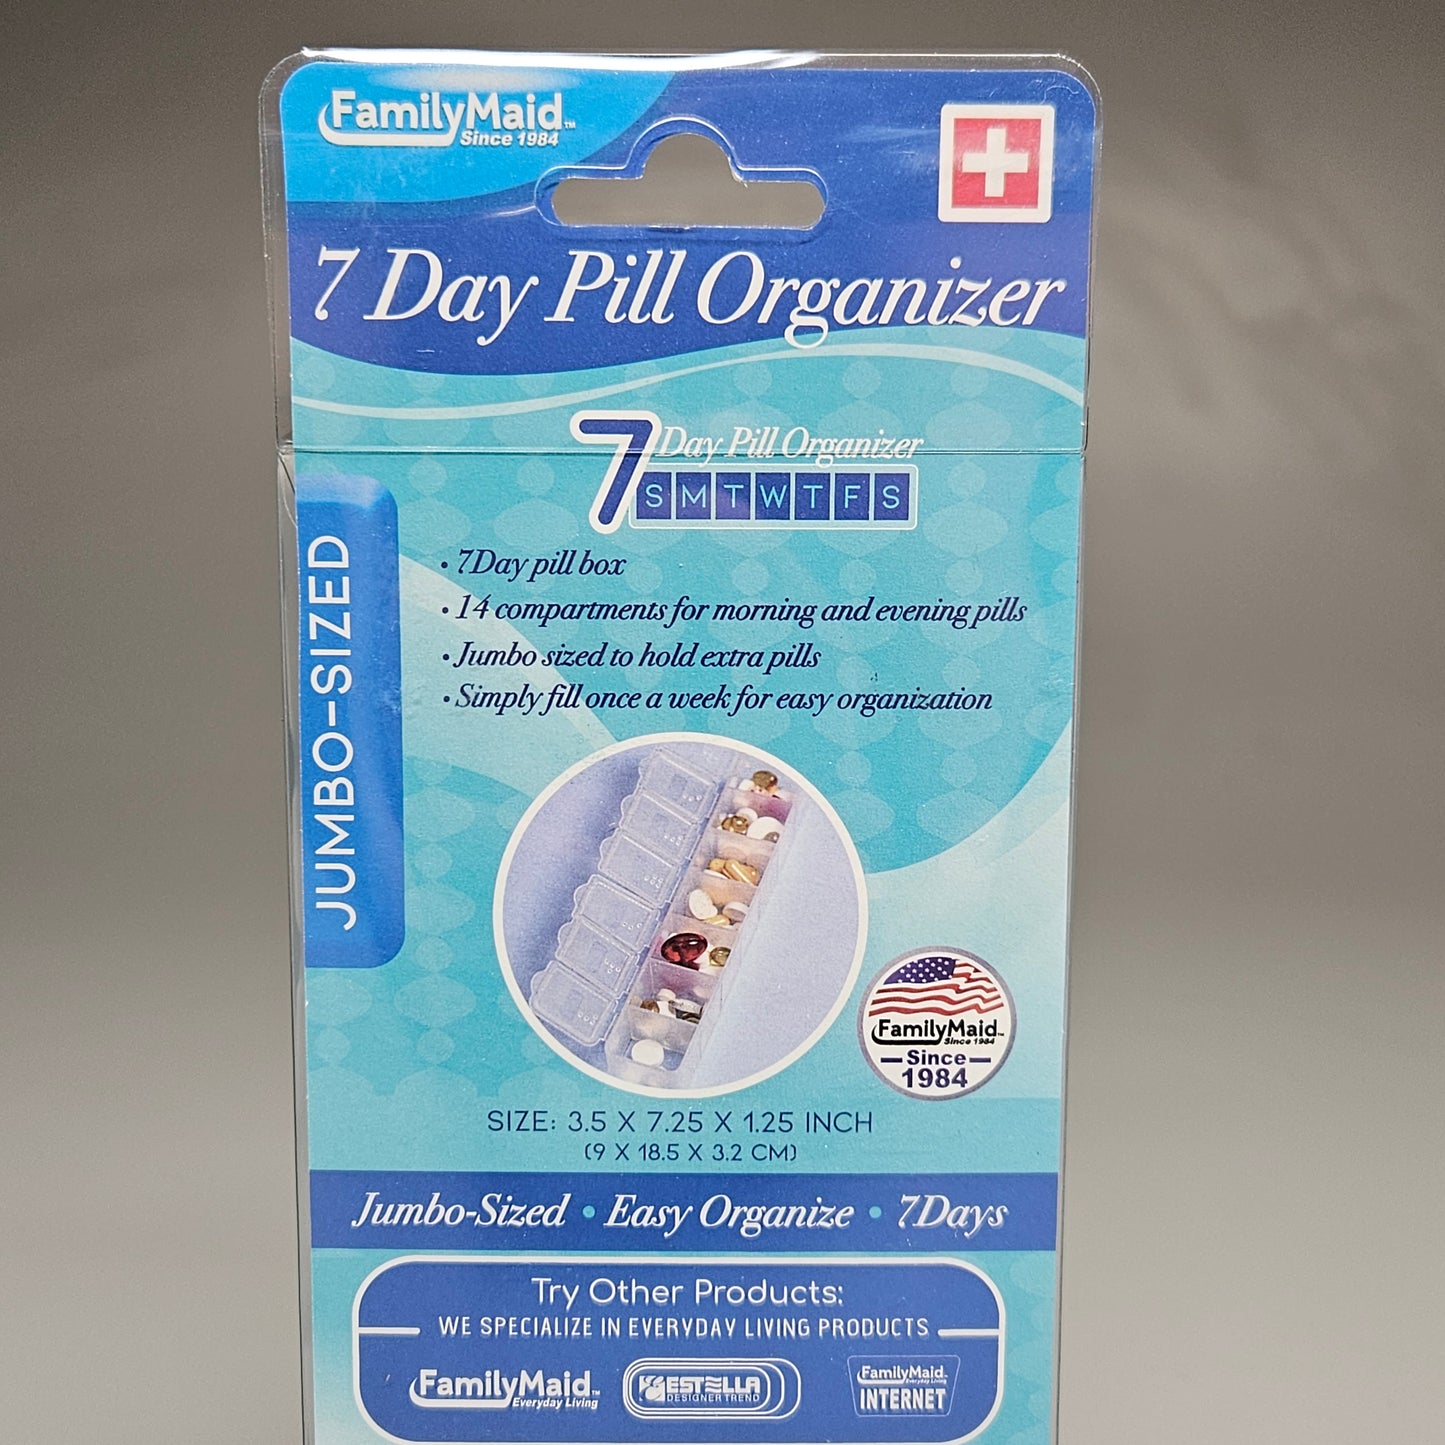 FAMILYMAID (2 PACK) 7-Day Pill Organizer 14 Compartments! Easy Organize Jumbo Size